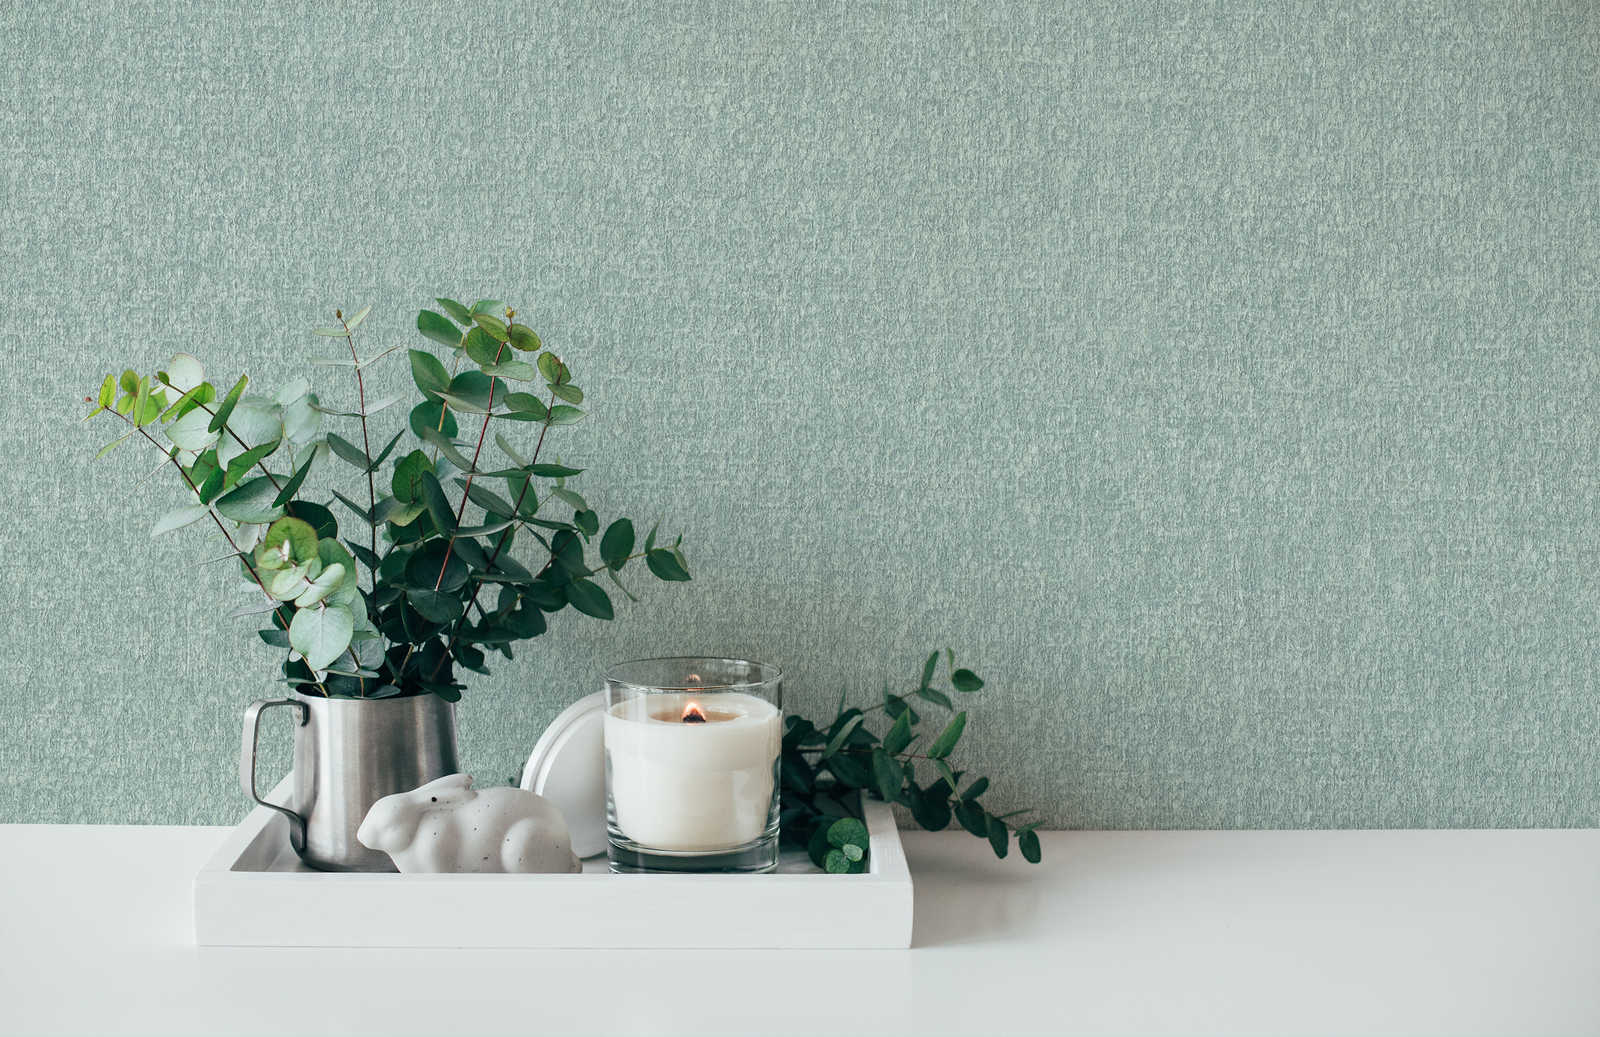             Textured wallpaper mint green with tone on tone pattern
        